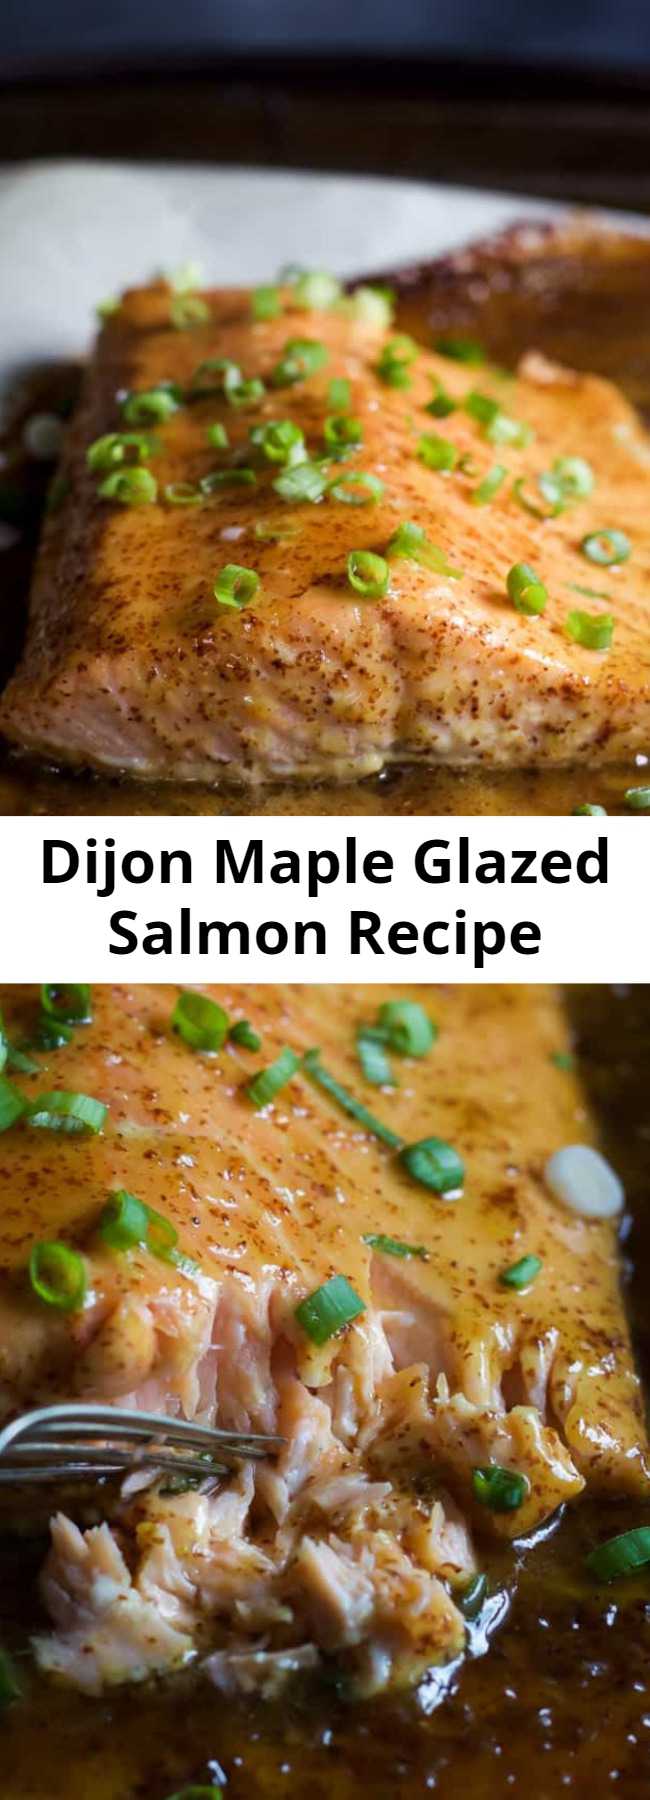 Dijon Maple Glazed Salmon Recipe - Dijon Maple Glazed Salmon is one of my favorite quick & healthy dinner recipes. It’s full of tangy and sweet flavors from only 3 ingredients with a whooping 218 calories per serving!